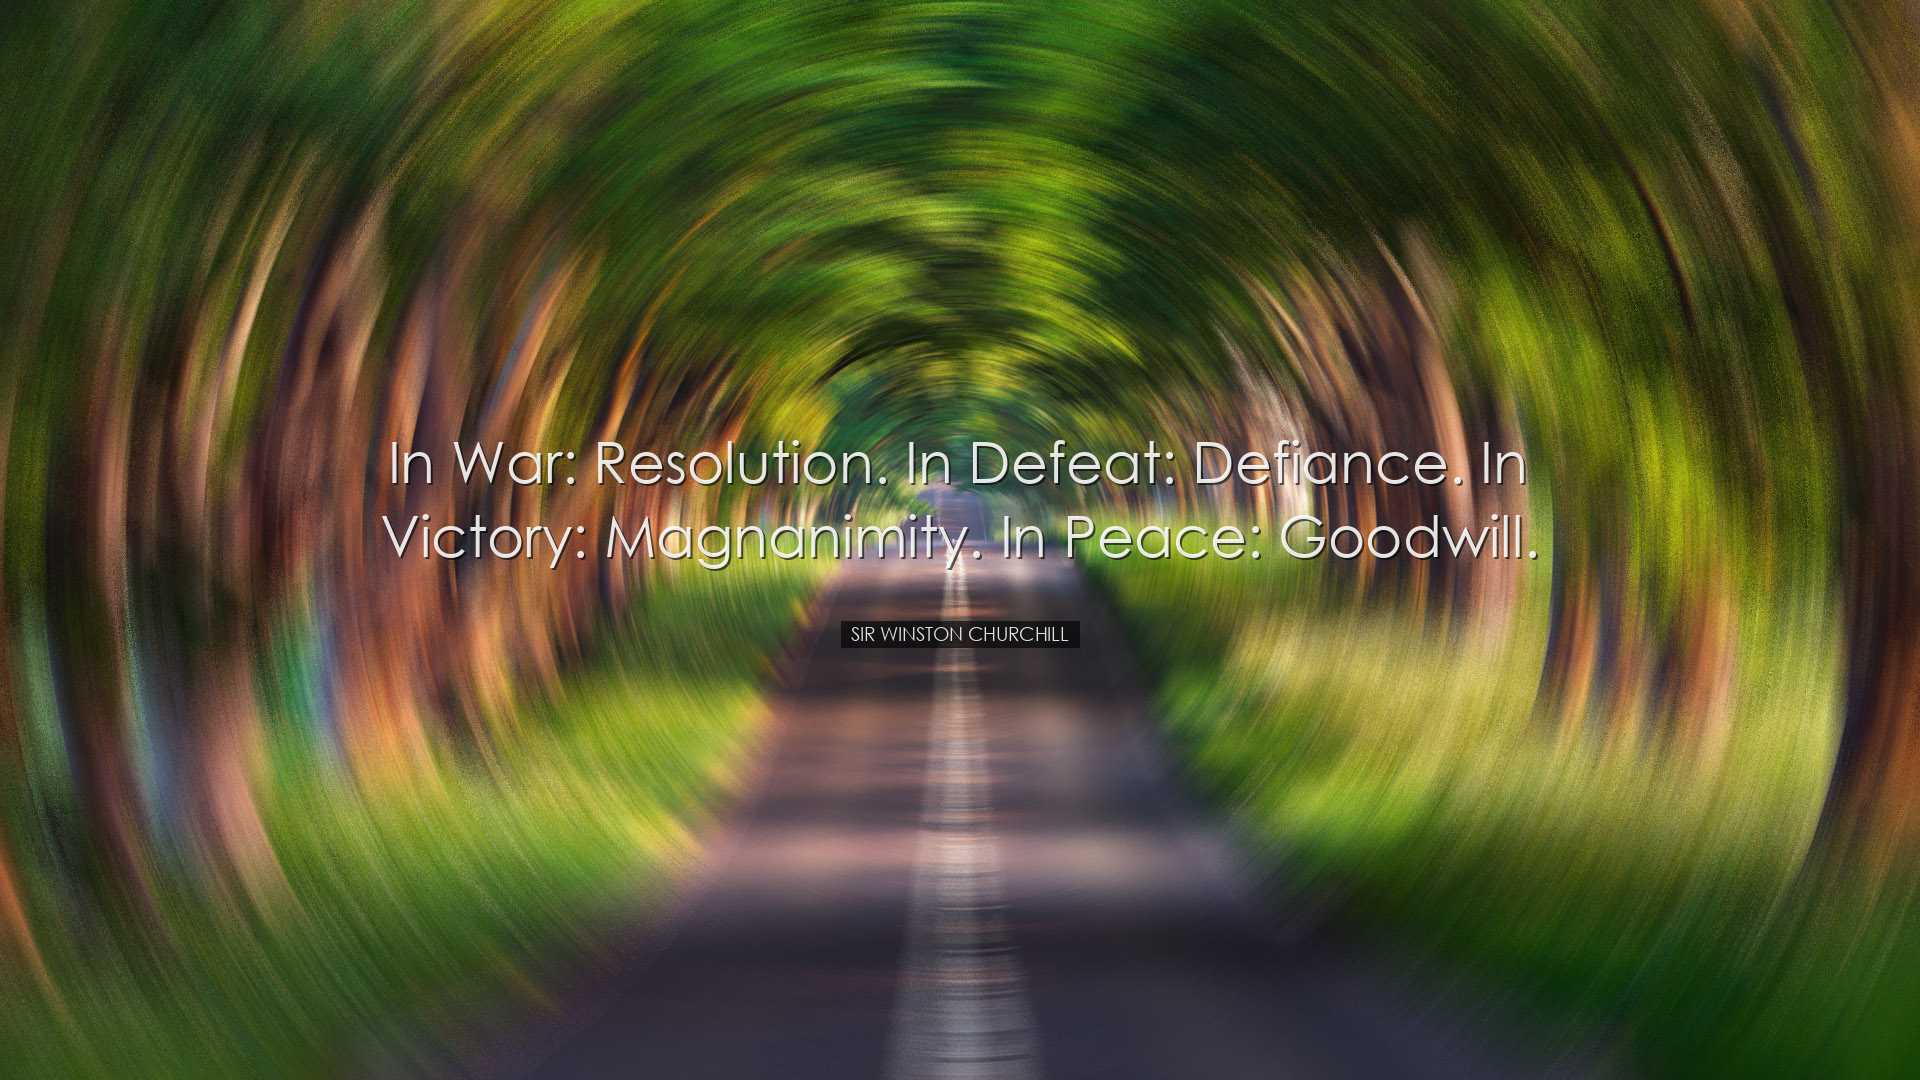 In War: Resolution. In Defeat: Defiance. In Victory: Magnanimity.